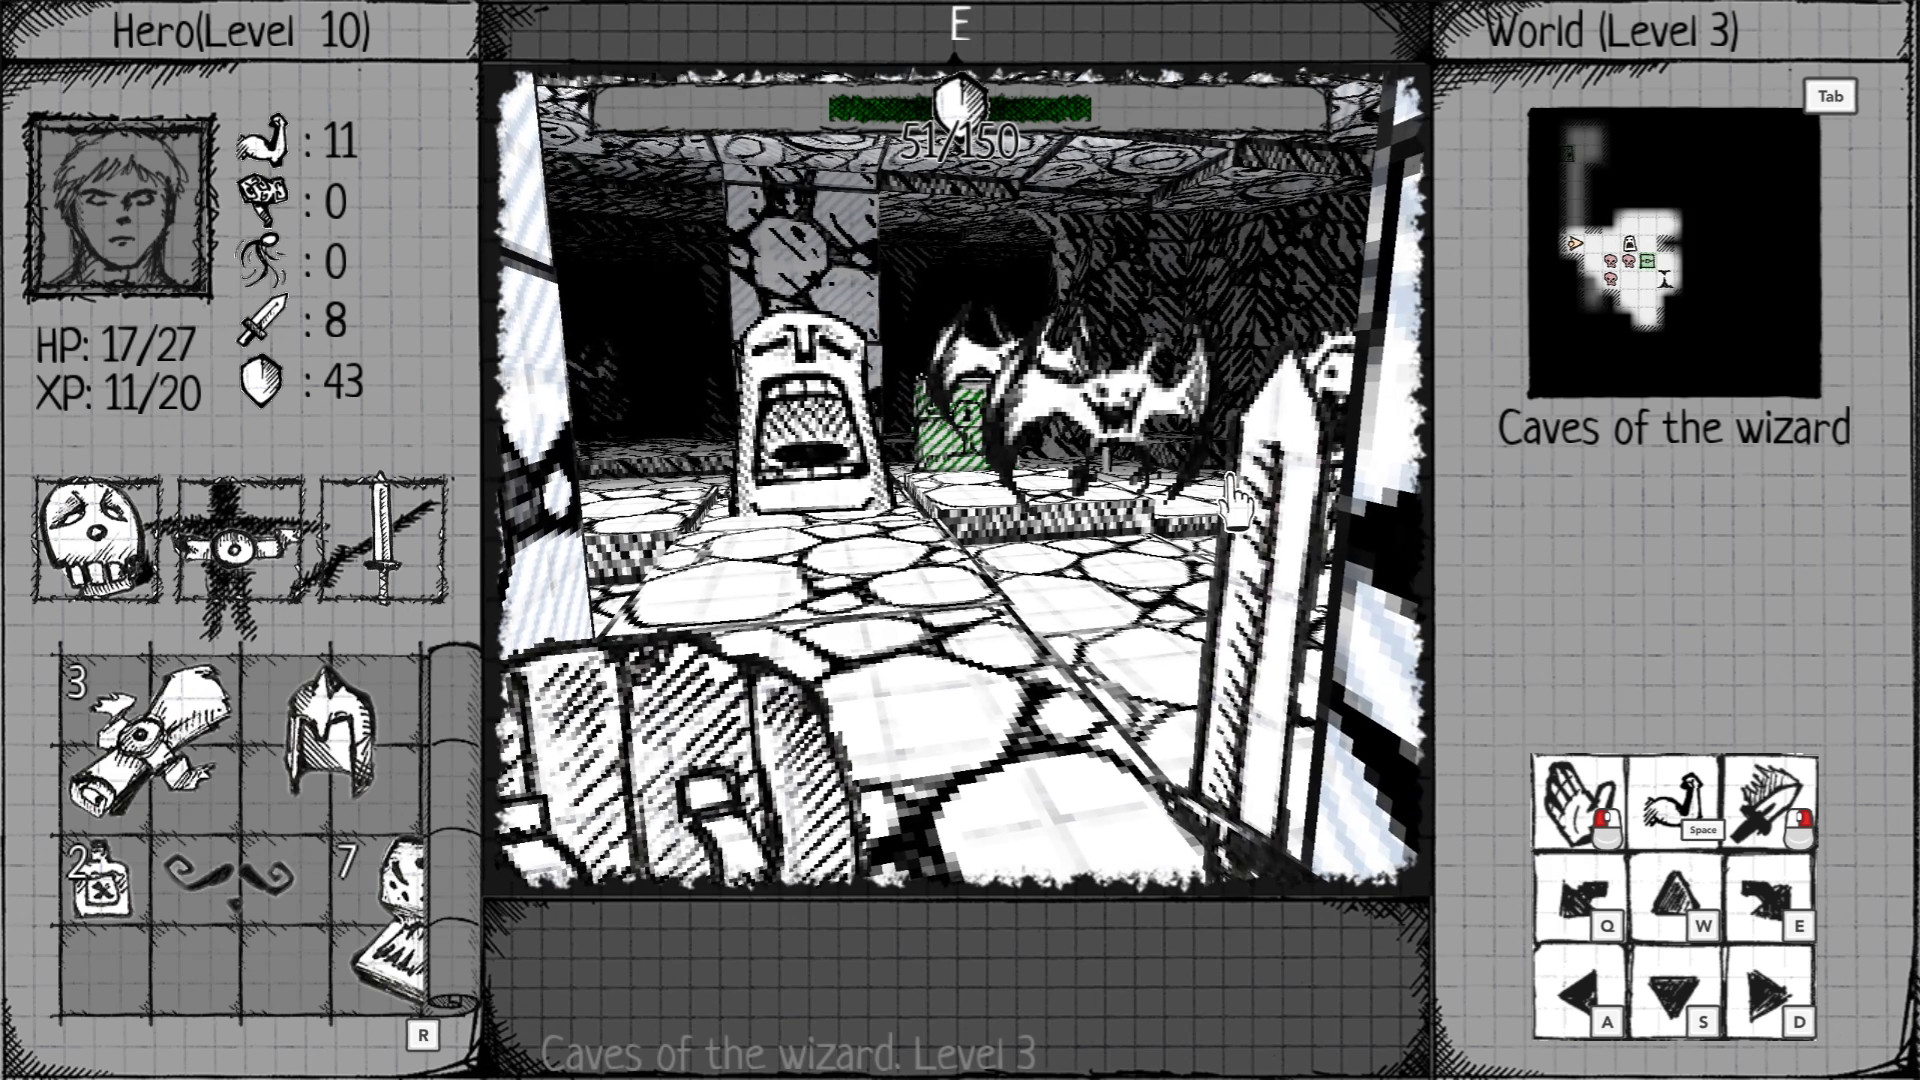 Drawngeon: Dungeons of Ink and Paper Steam CD Key 1.39 USD